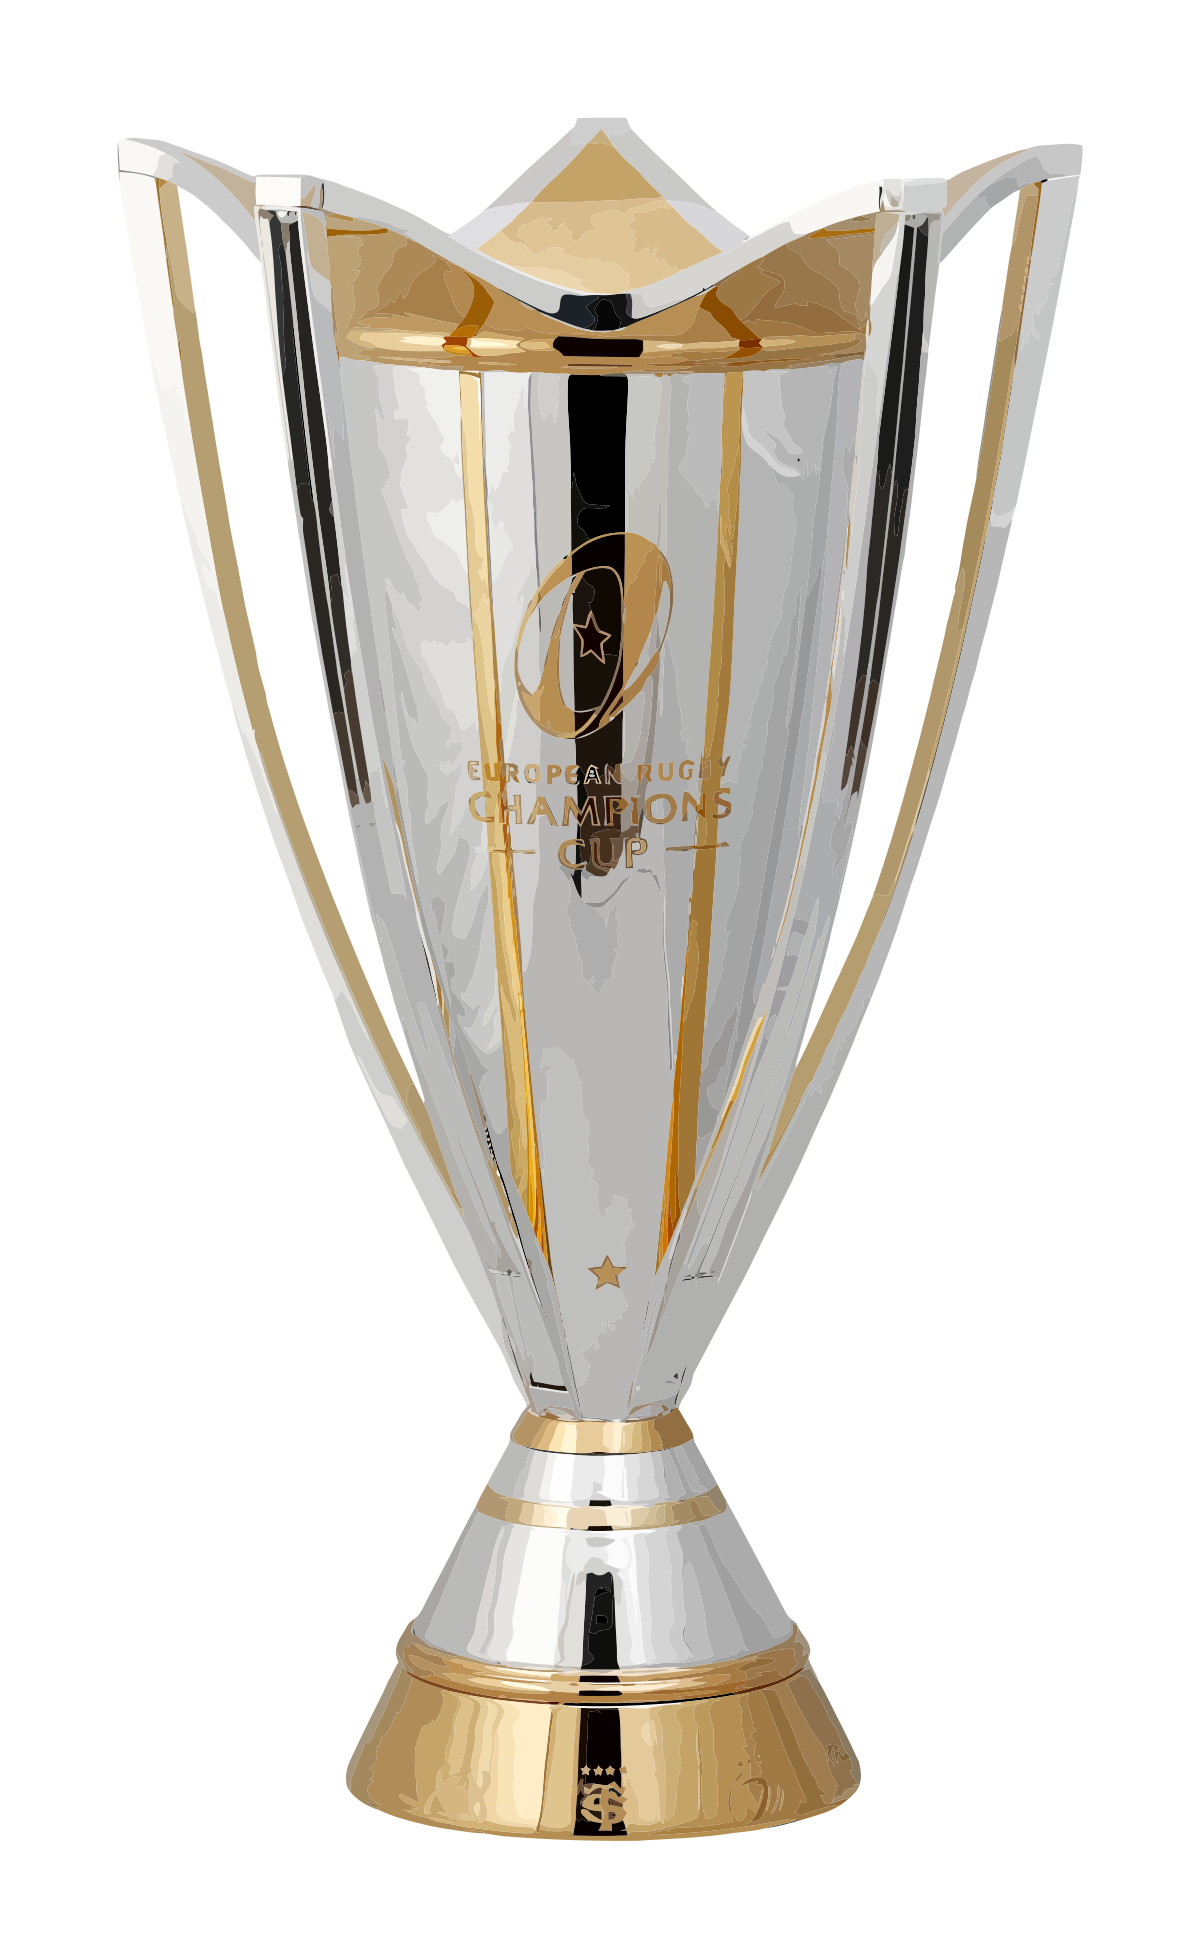 Award Cup Background PNG Image